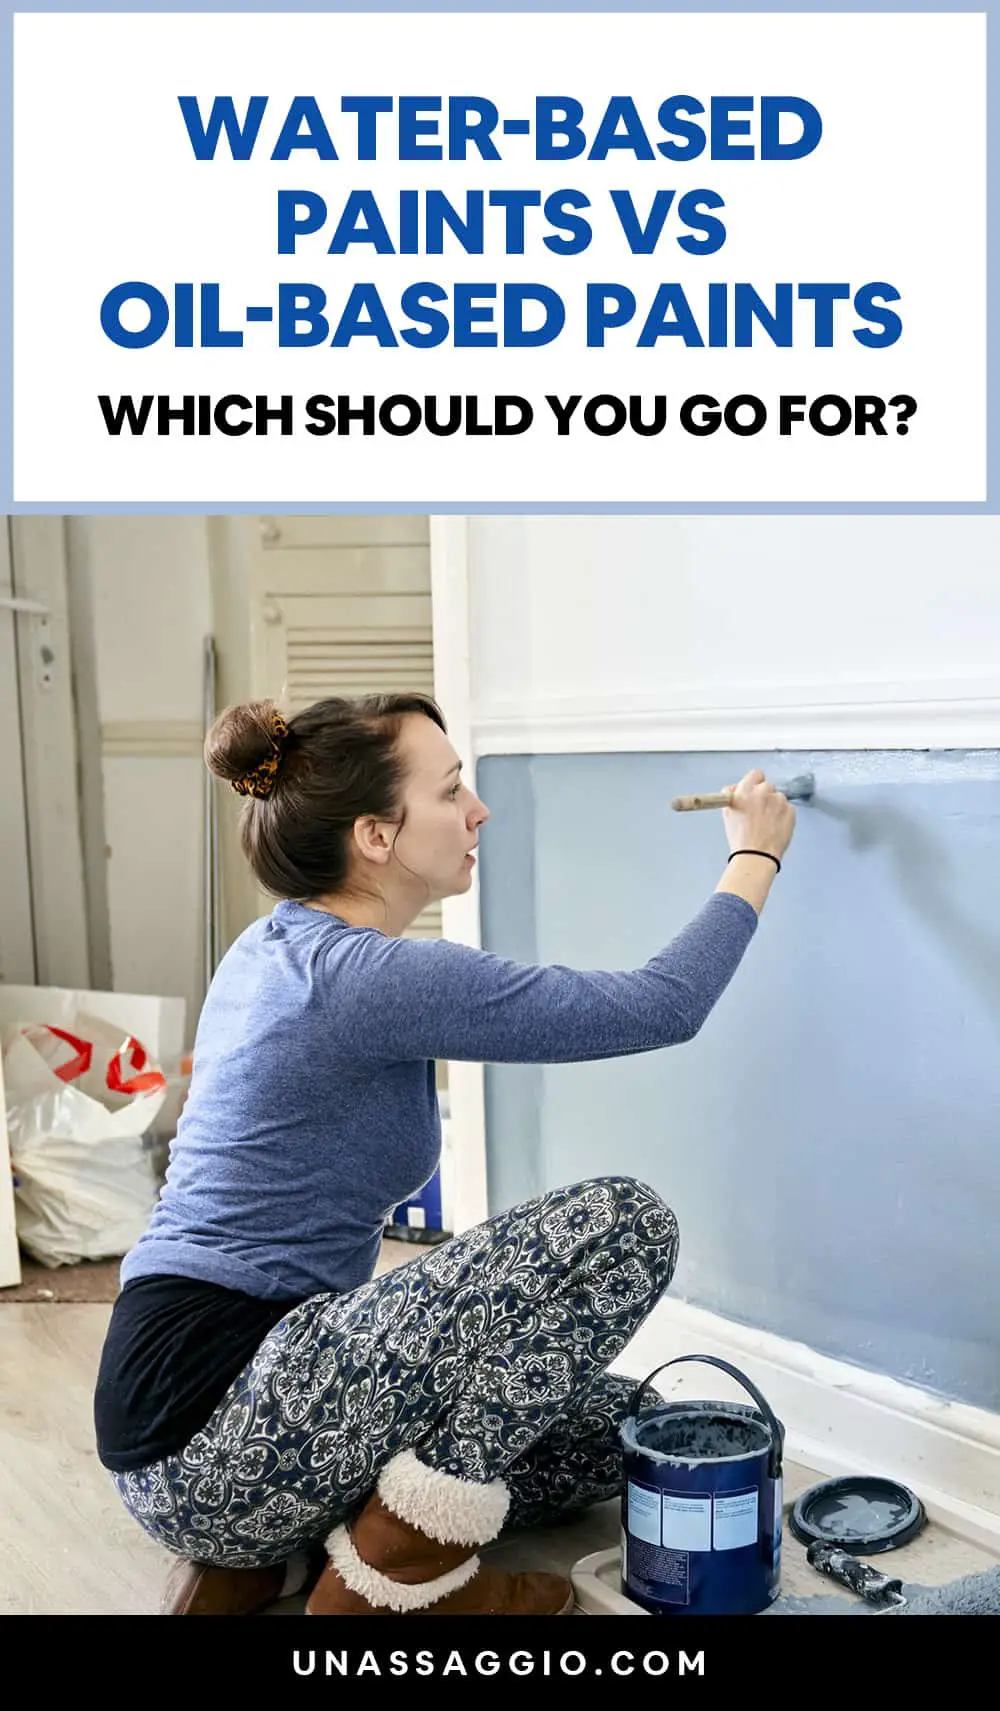 Water-Based Paints vs Oil-Based Paints: Which One Should You Go For?